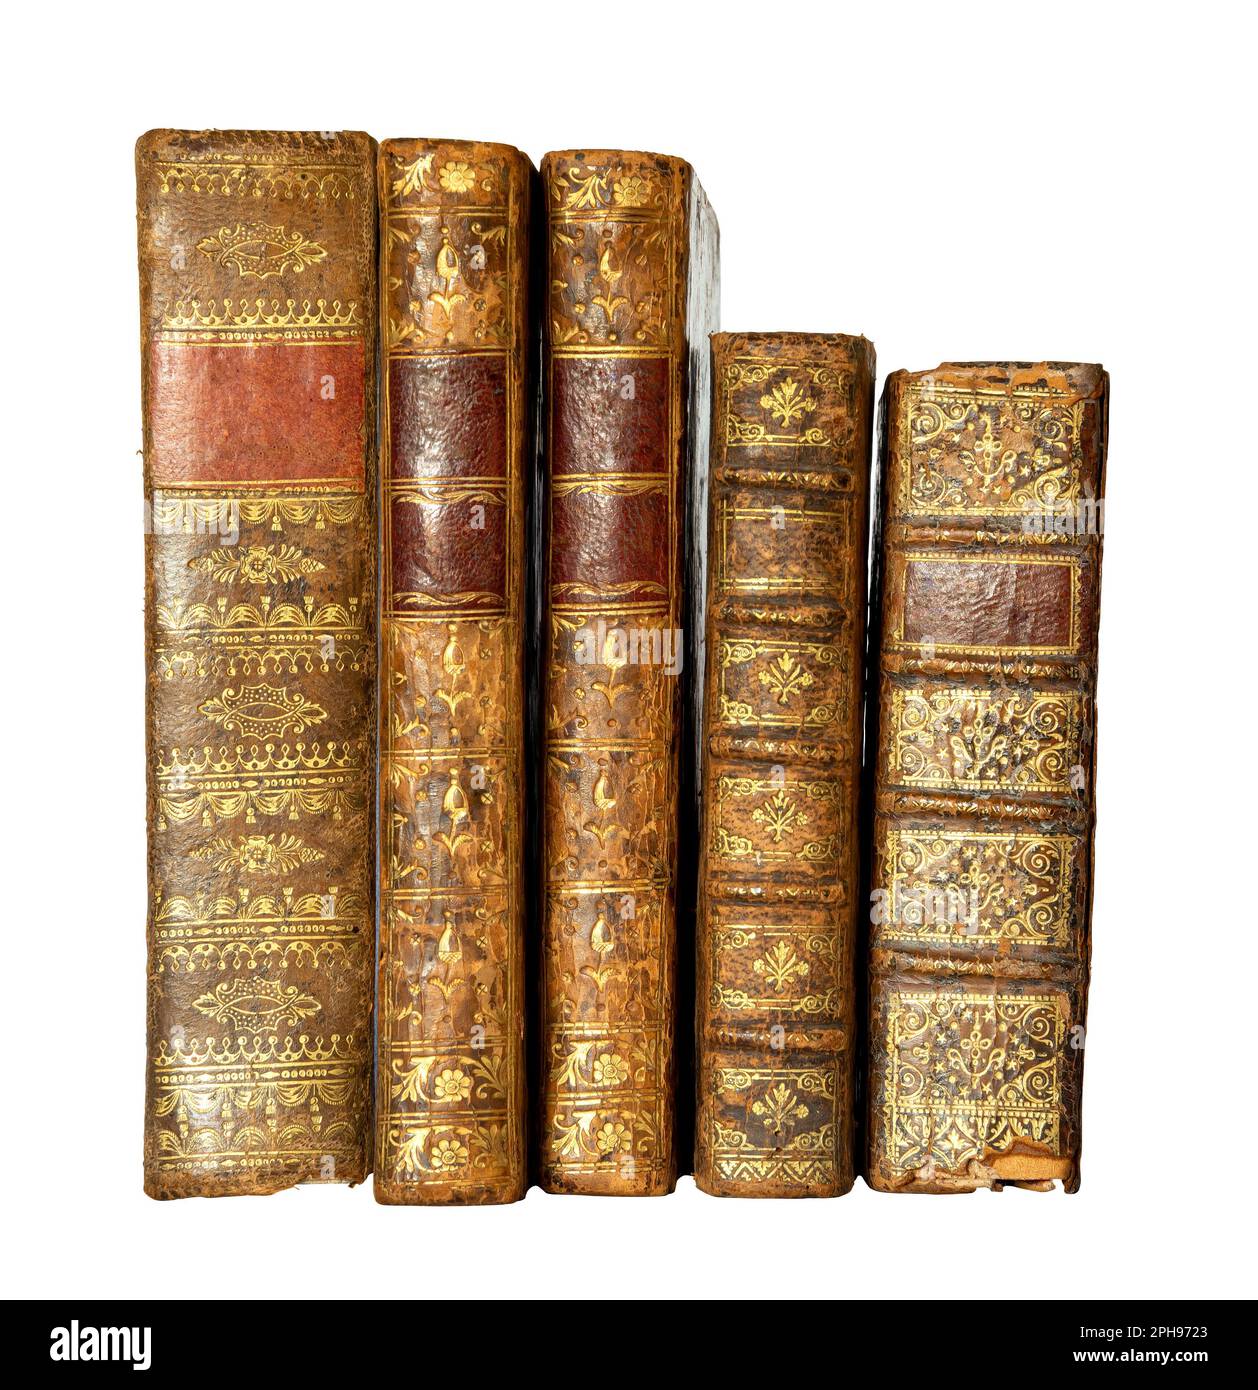 Row of antique books with a leather cover and golden ornaments on isolated on white background Stock Photo